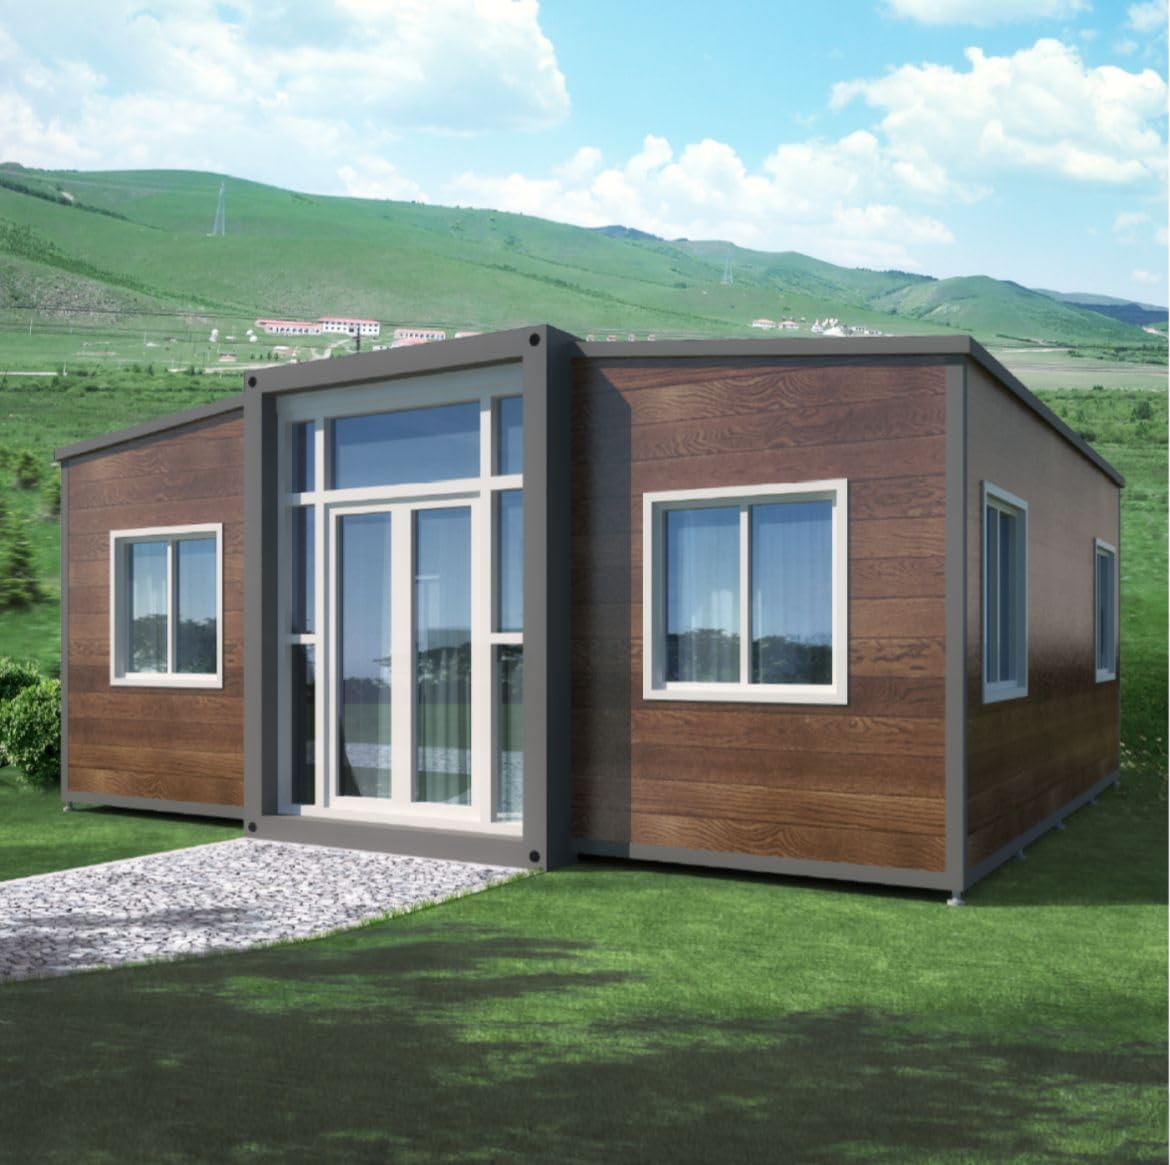 Luxury Portable Prefabricated Tiny Mobile Home 19x20ft, Mobile Expandable Plastic Prefab House for Booth, Hotel, Office, Guard House, Shop, Villa, Warehouse, Workshop (with Restroom and Kitchen)